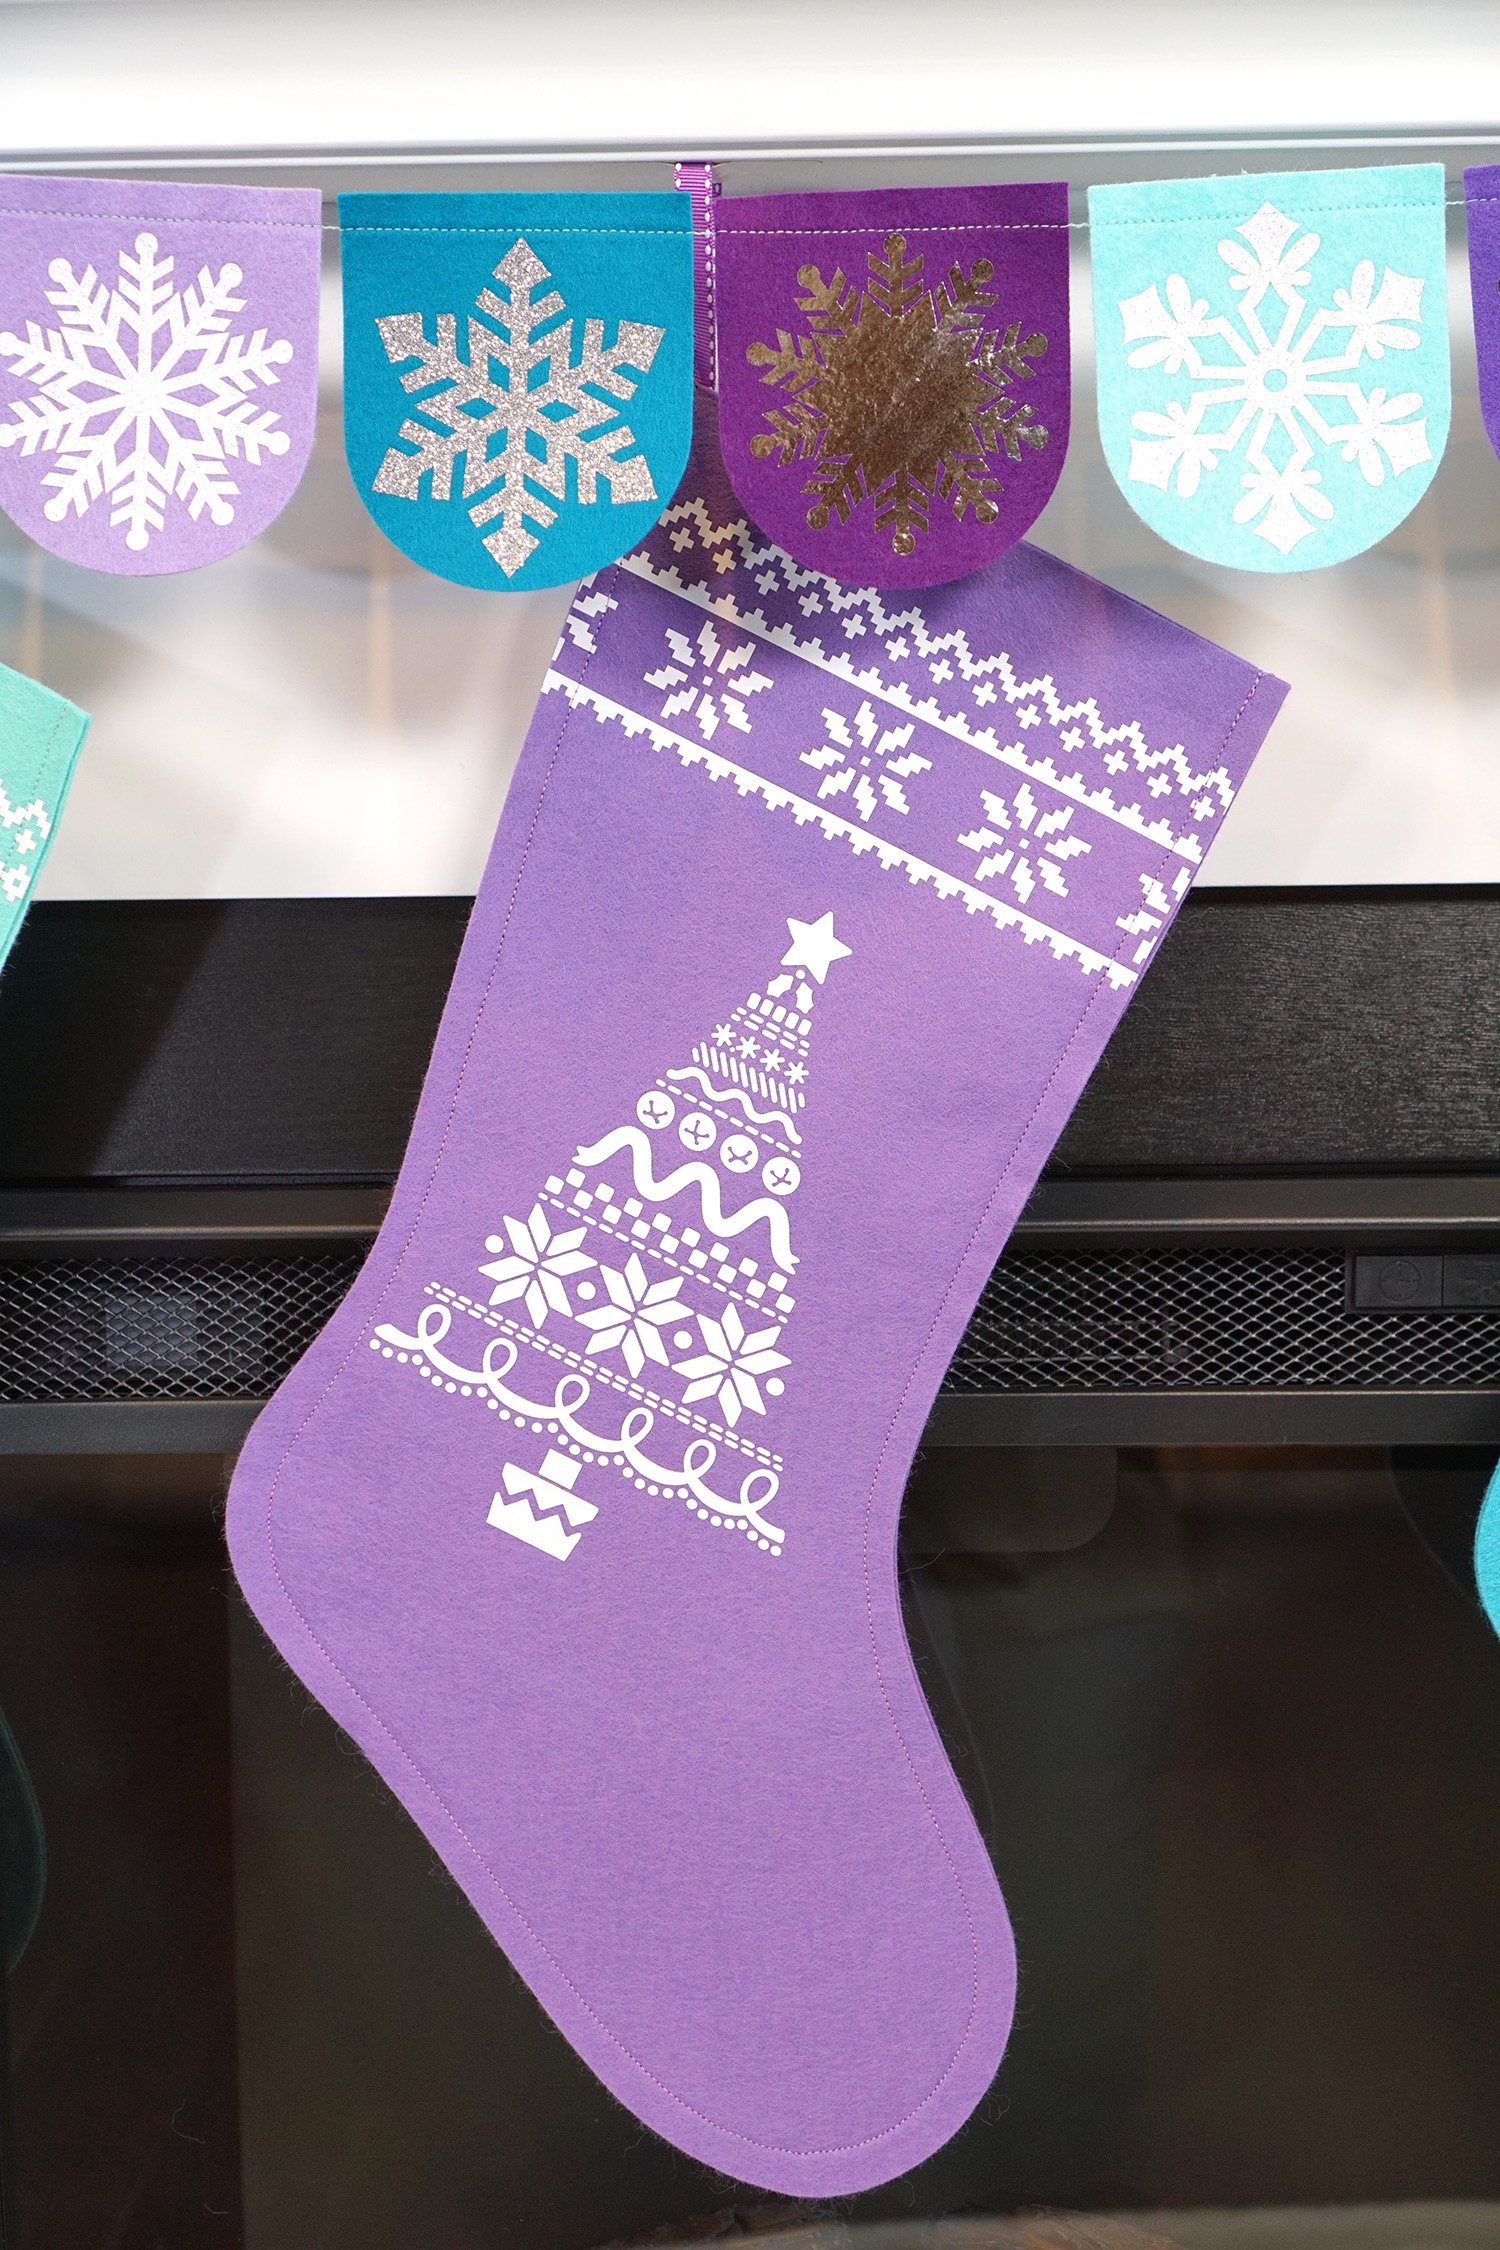 stocking hung on mantel face